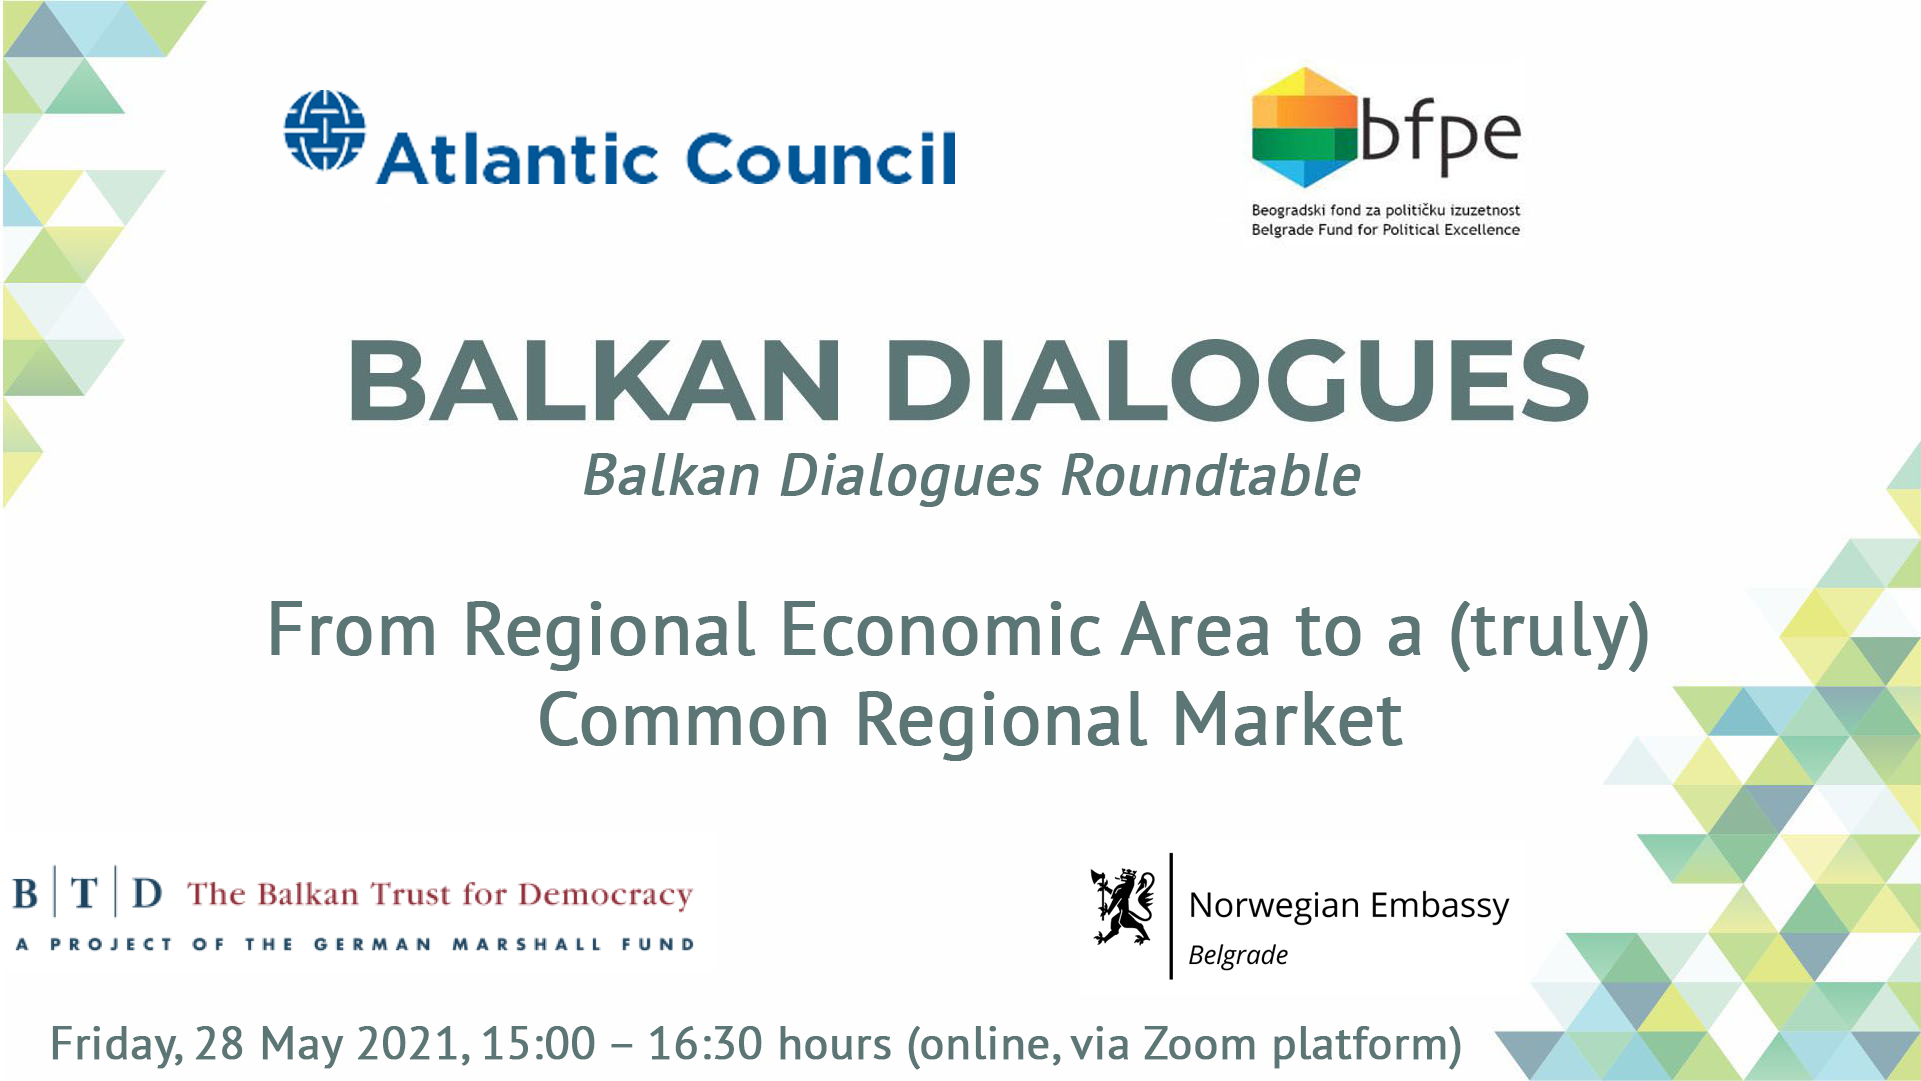 Balkan Dialogues Roundtable – From Regional Economic Area to a (truly) Common Regional Market